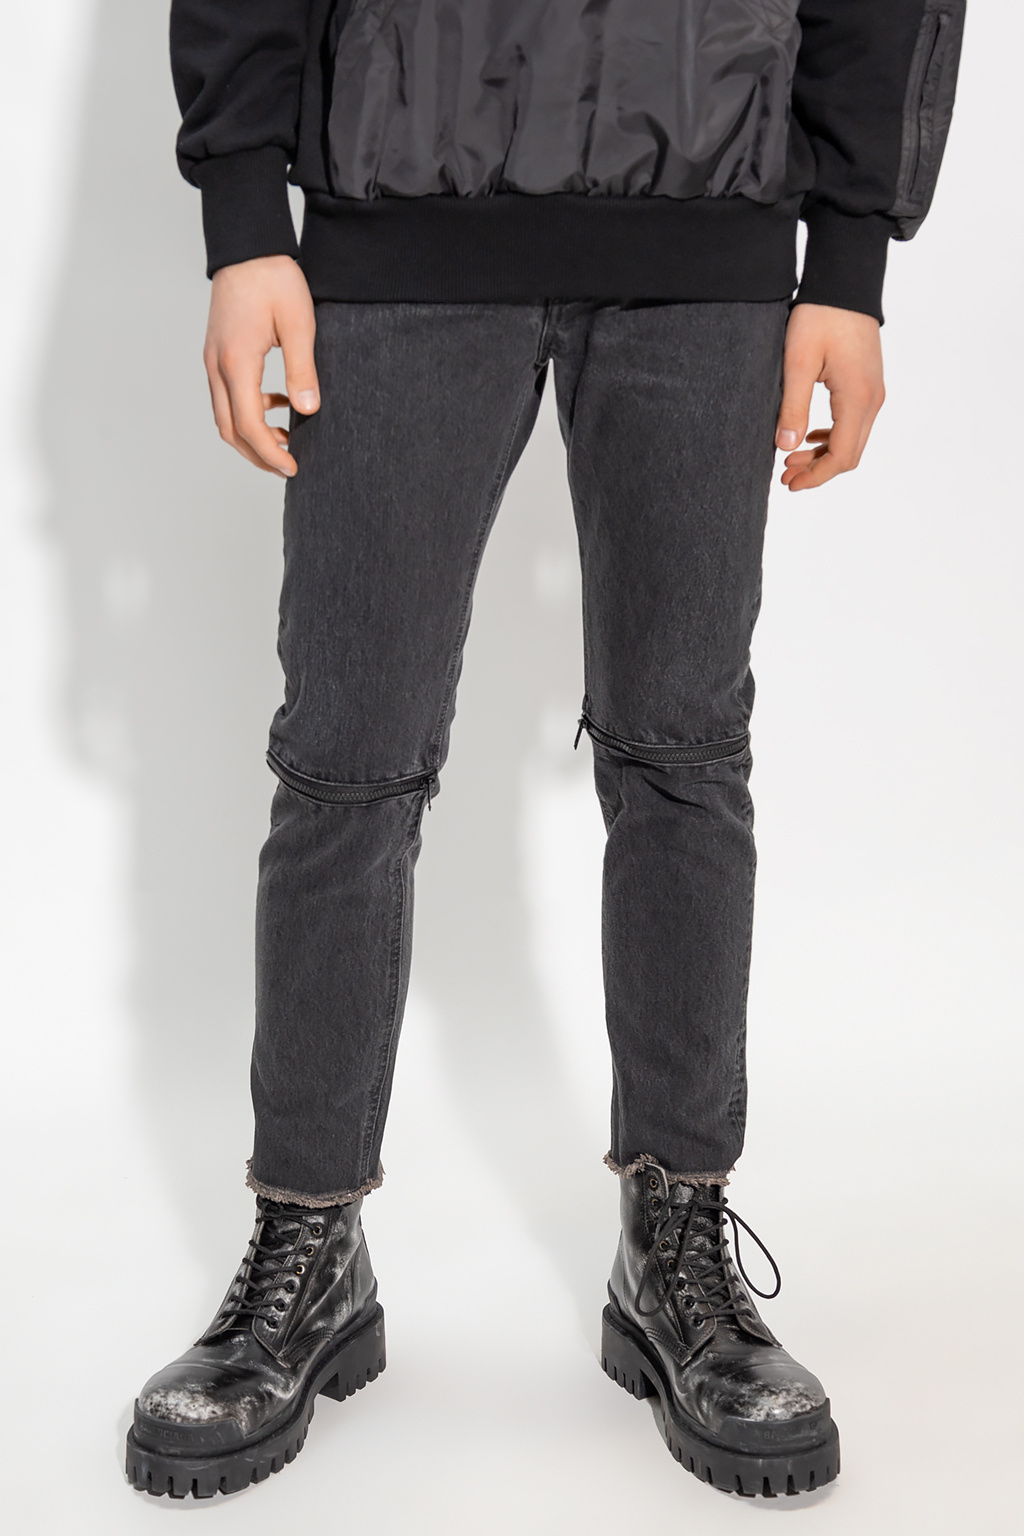 PURPLE BRAND Distressed Whited Out Schwarz 29 Slim Fit Jeans